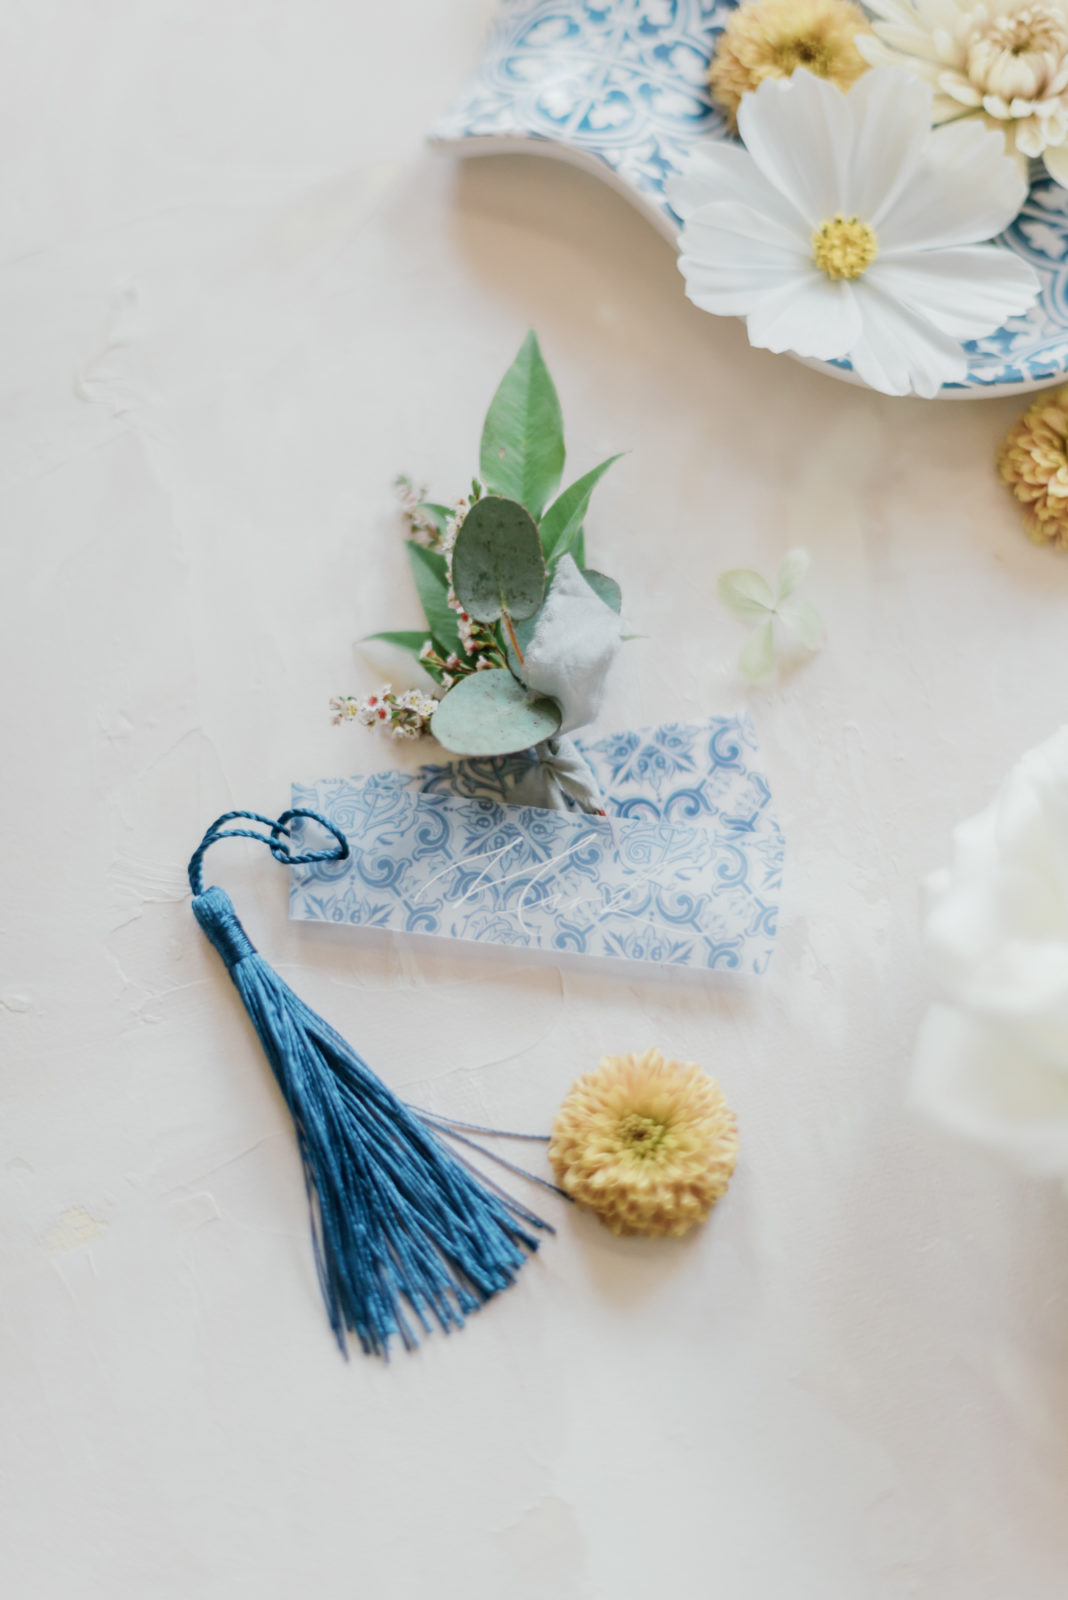 Portugal inspired wedding, wedding stationery, blue accents